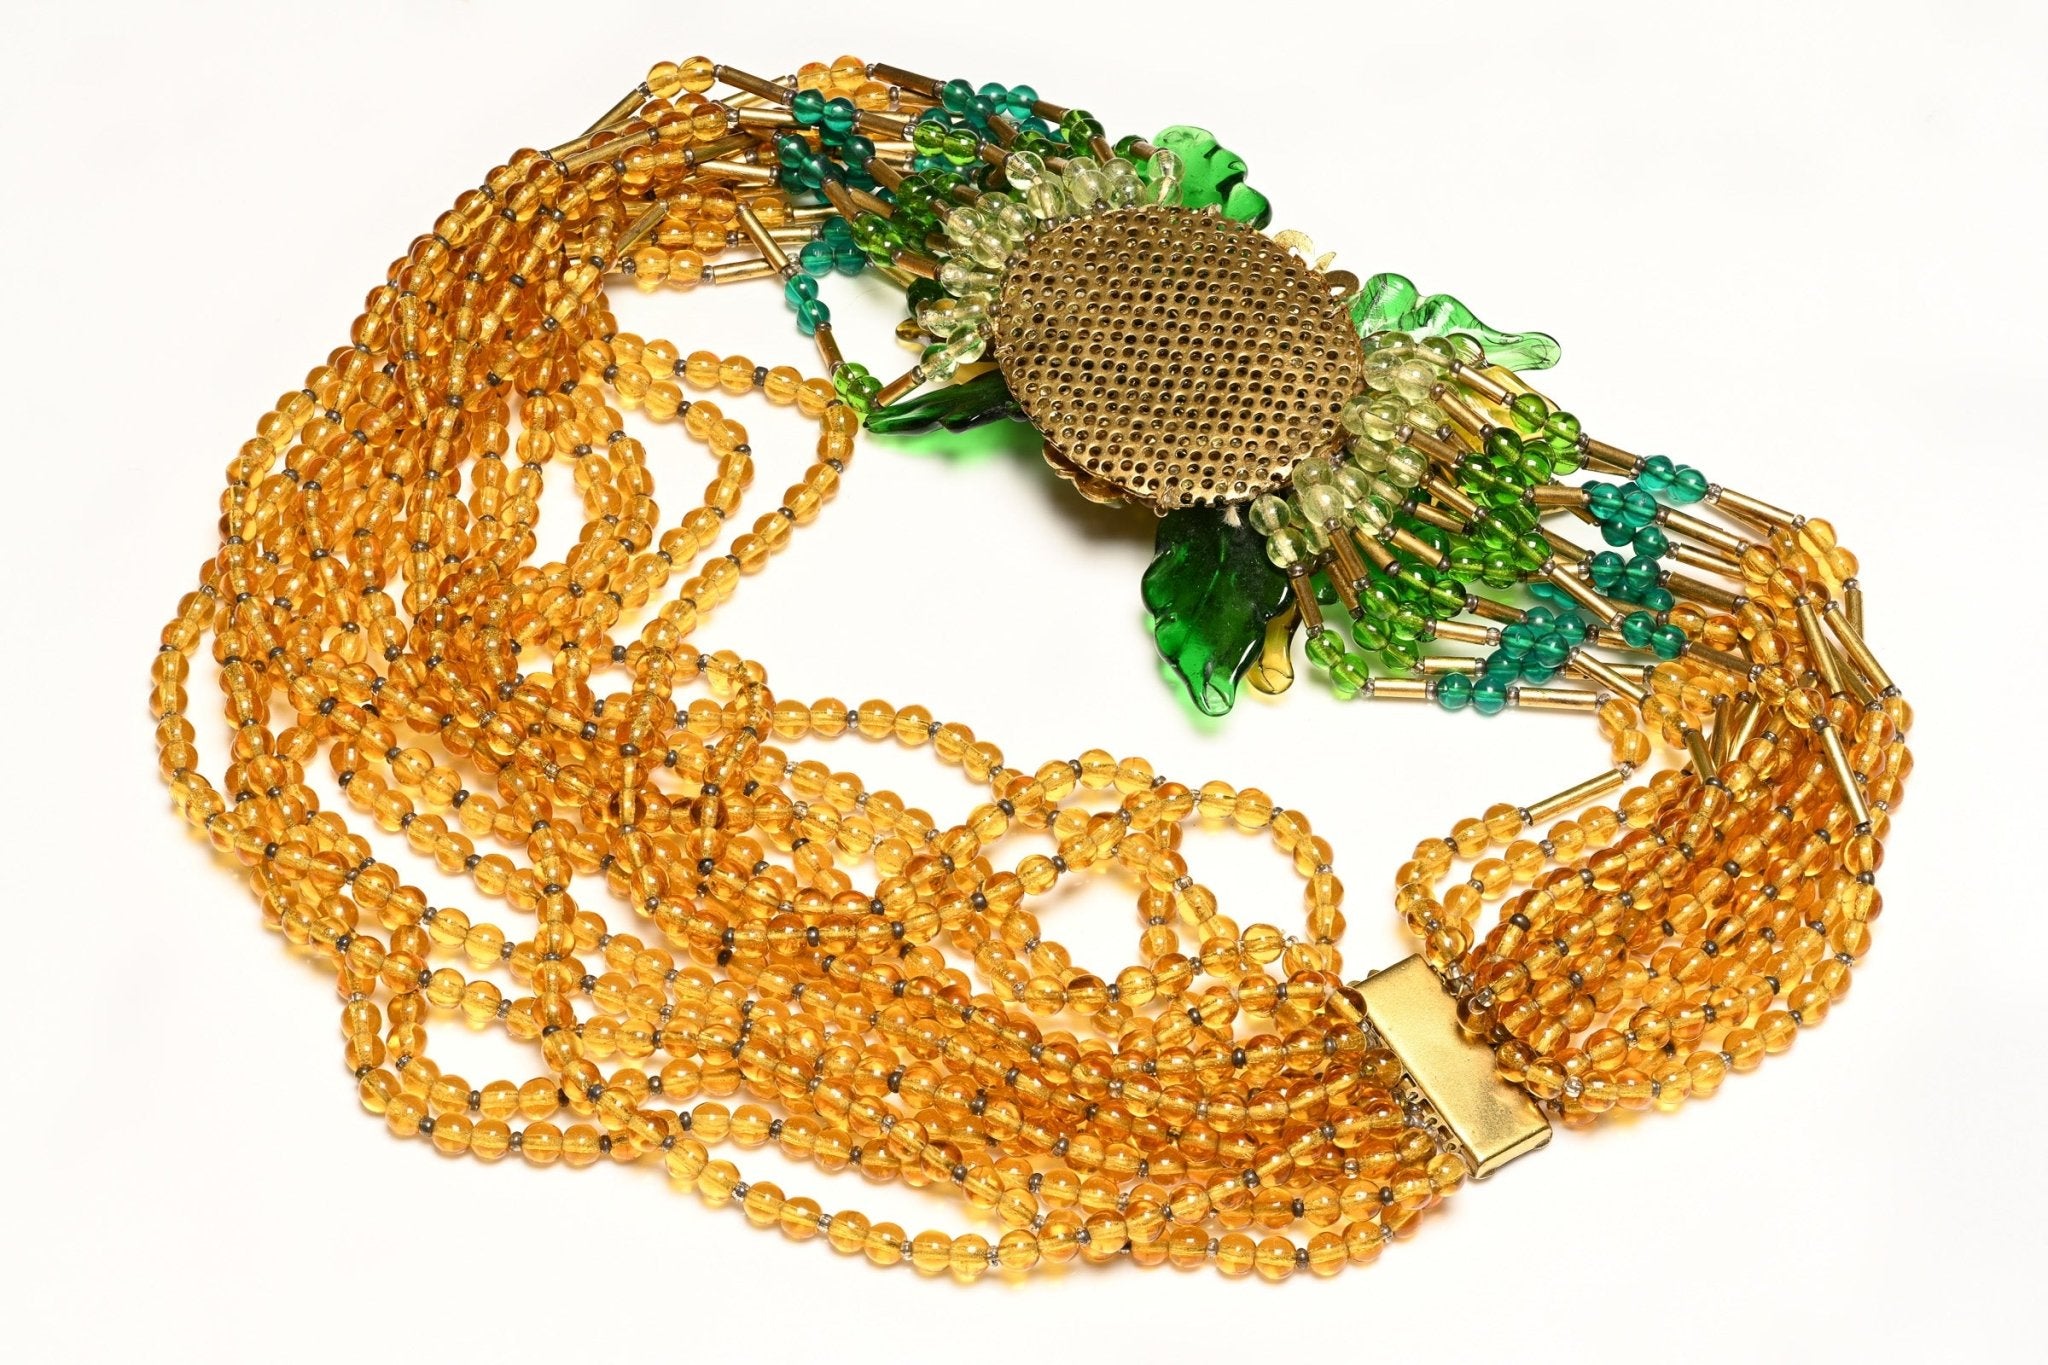 Vintage 1930's Miriam Haskell Brown Green Glass Beads Leaf Collar Necklace